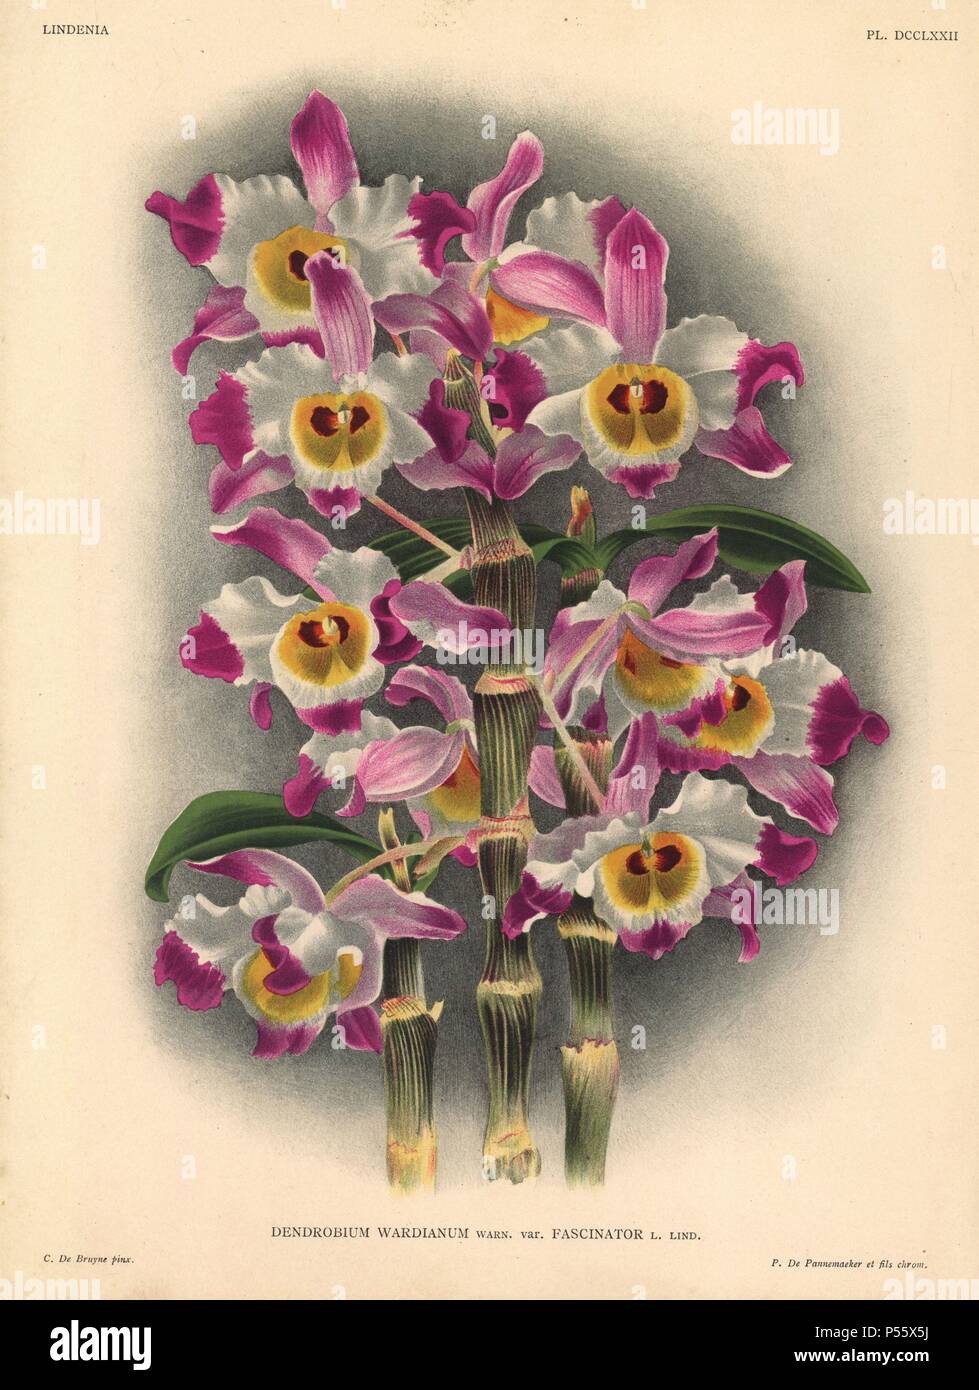 Fascinator variety of Dendrobium Wardianum, Warn., orchid. Illustration drawn by C. de Bruyne and chromolithographed by P. de Pannemaeker et fils from Lucien Linden's 'Lindenia, Iconographie des Orchidees,' Brussels, 1902. Stock Photo